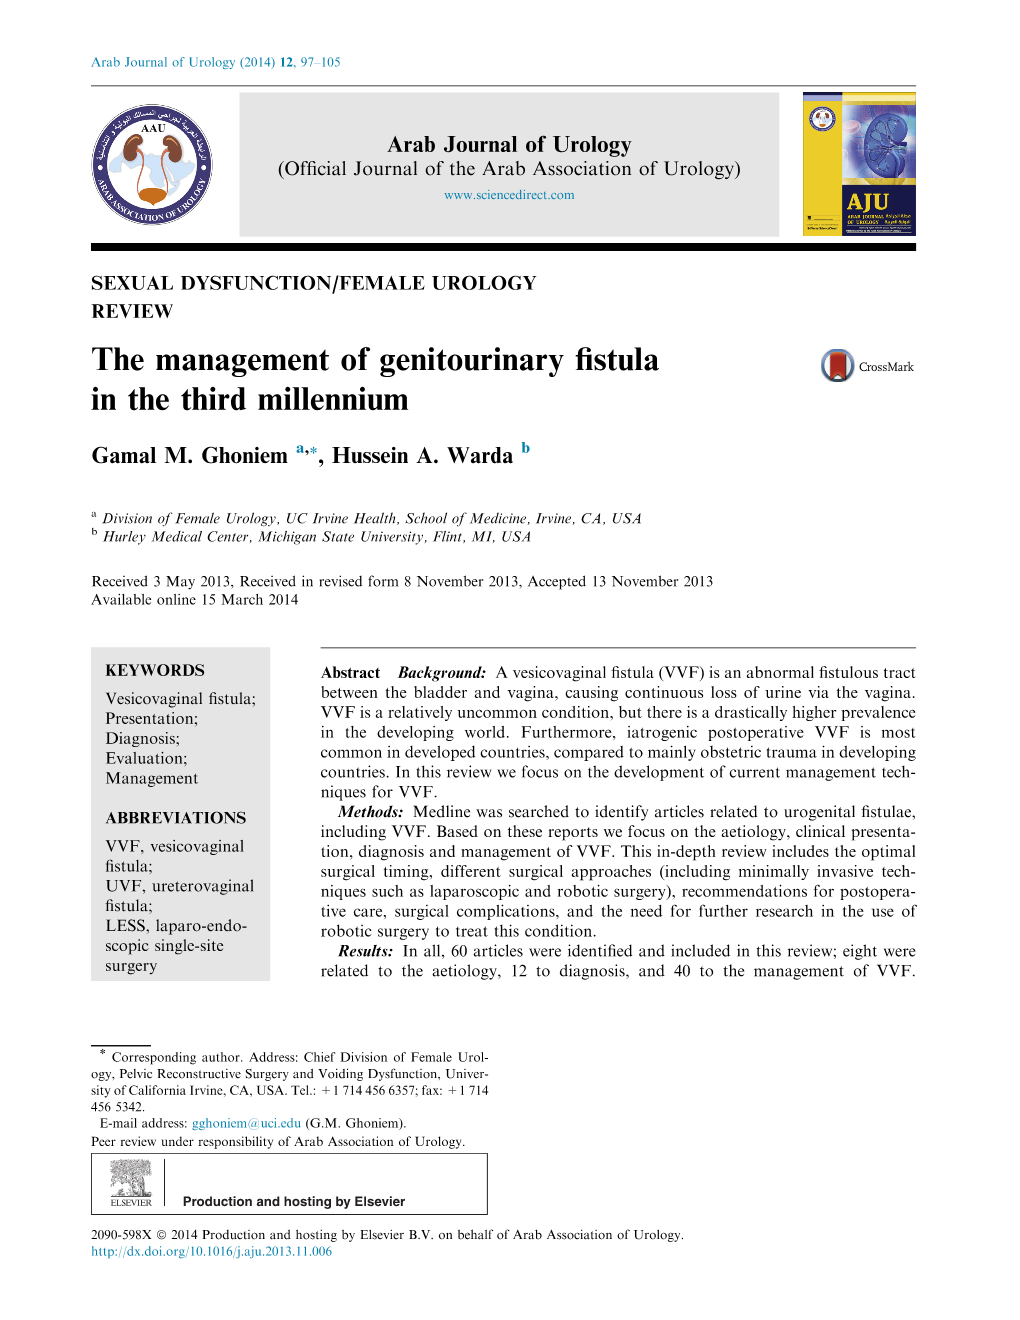 The Management of Genitourinary Fistula in the Third Millennium